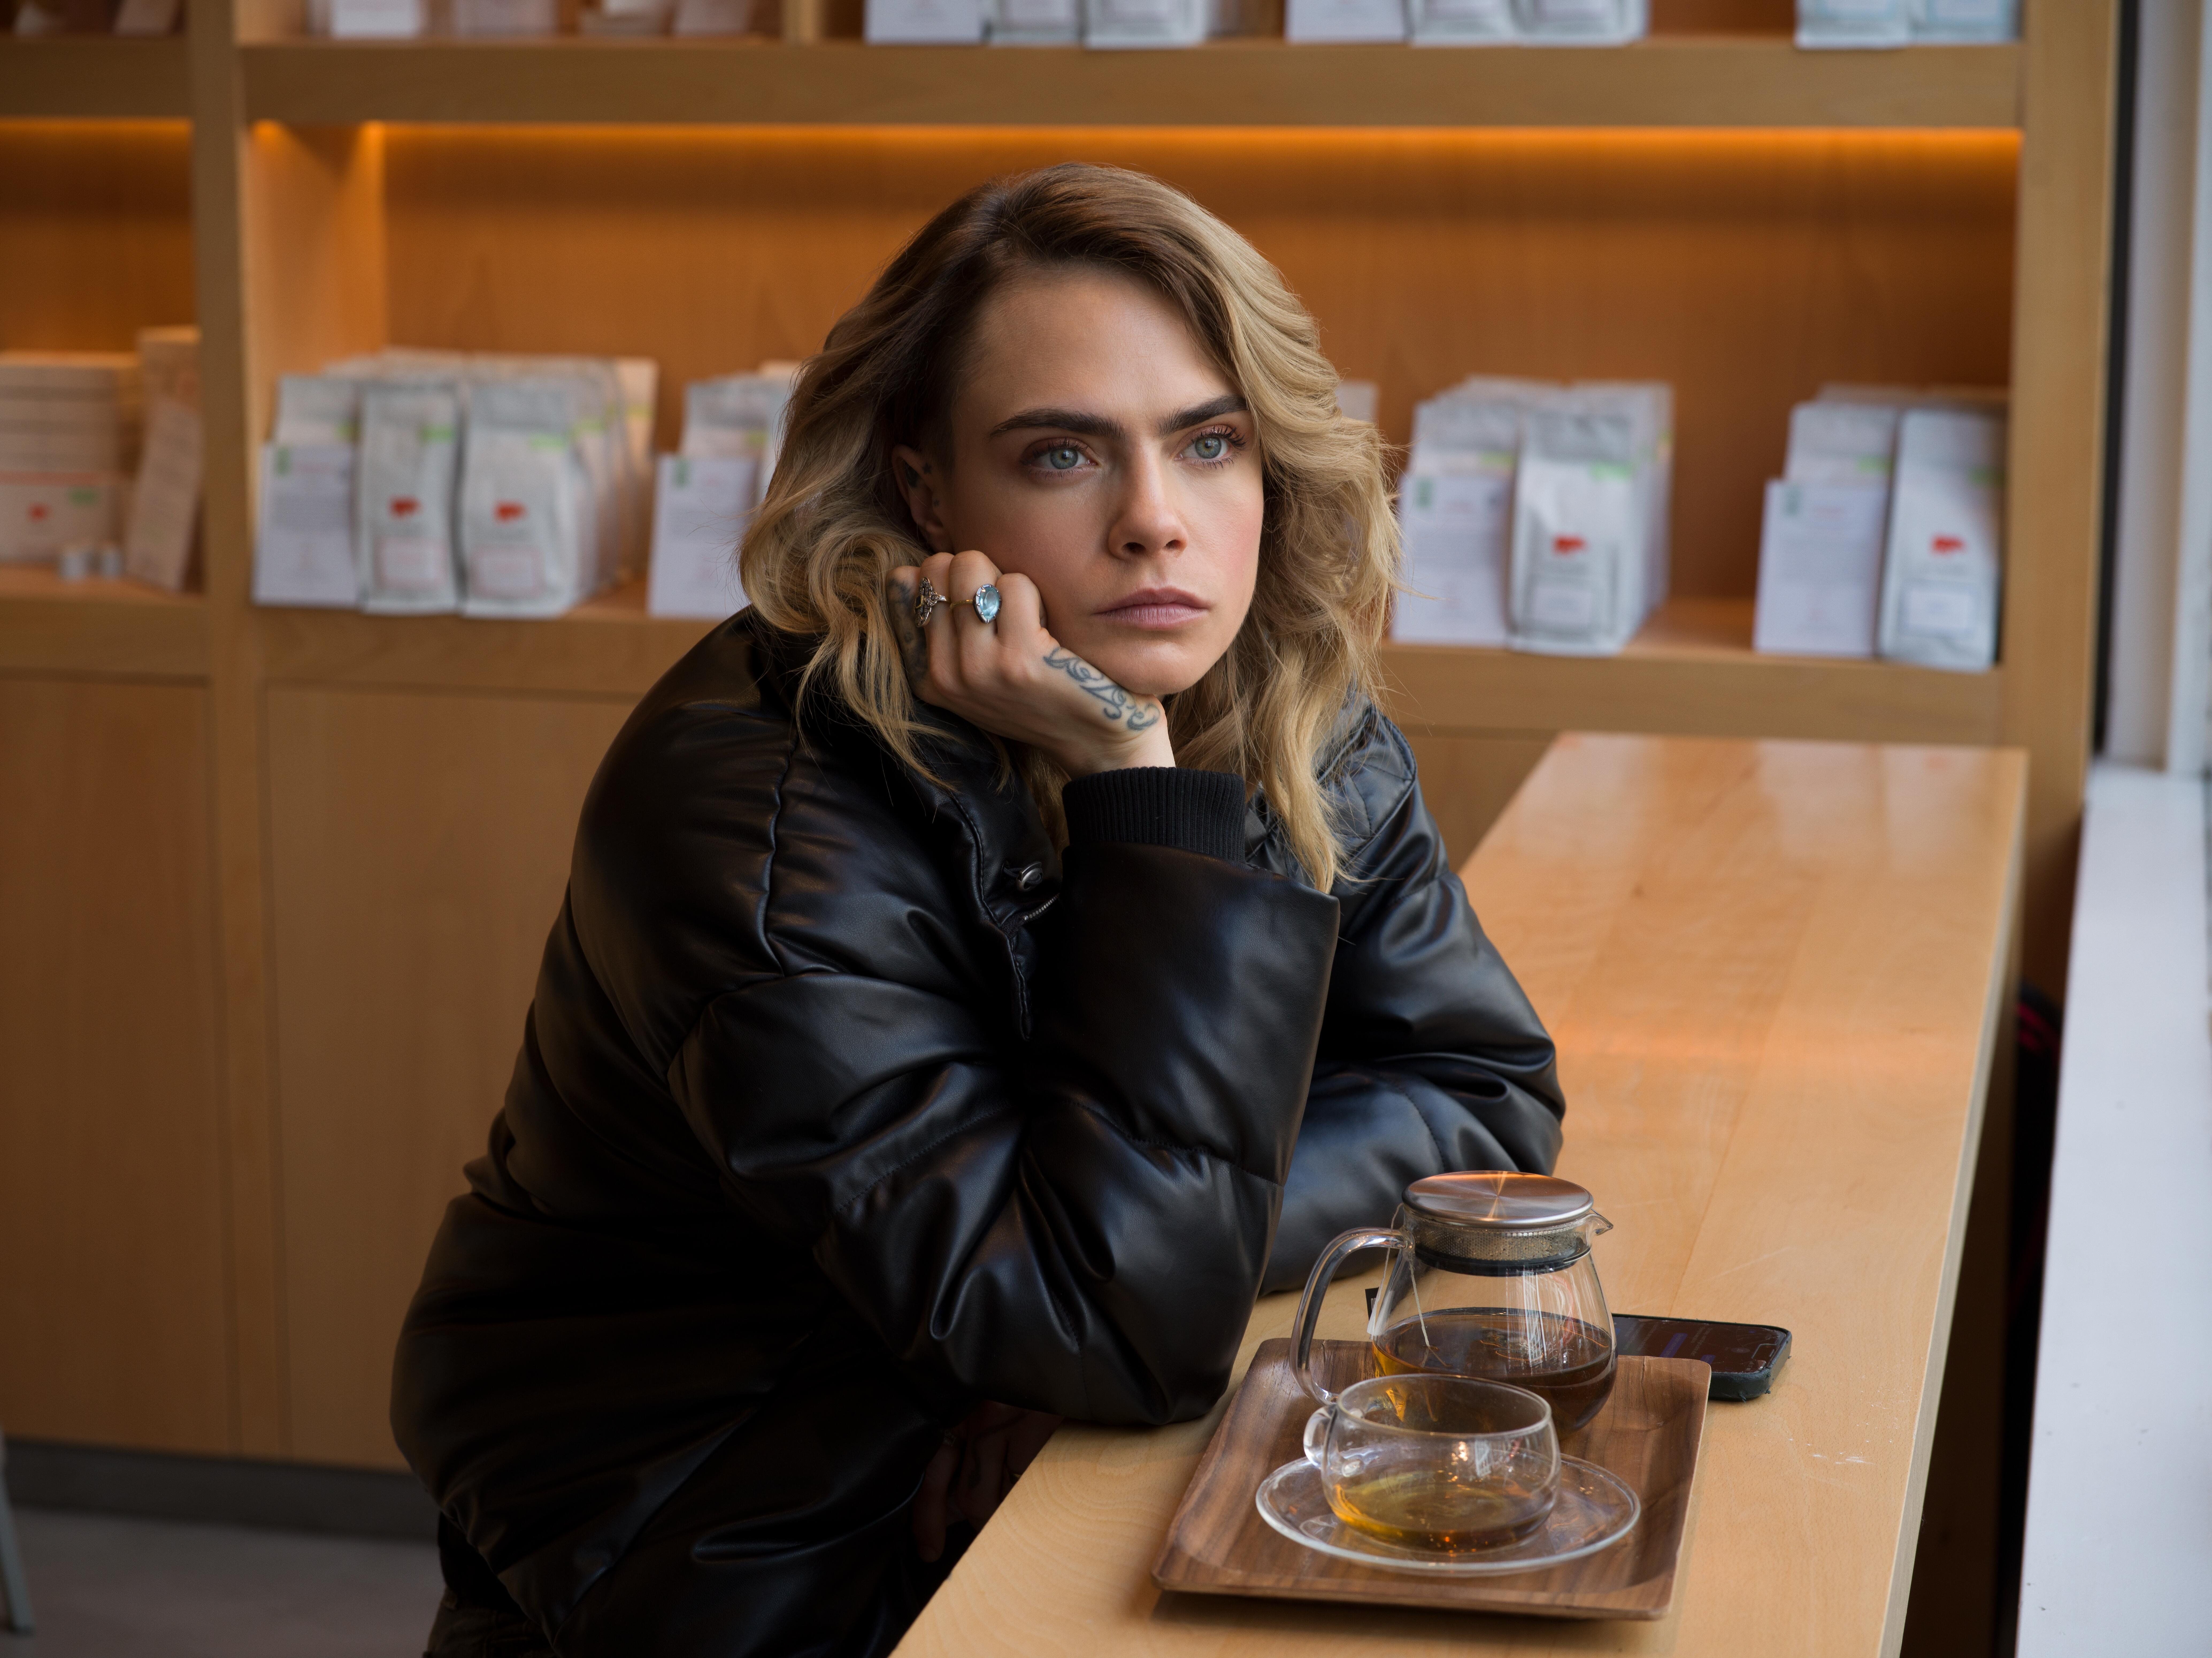 
Cara Delevingne Dishes on Exploring Her Sexuality in Hulu's Planet Sex
